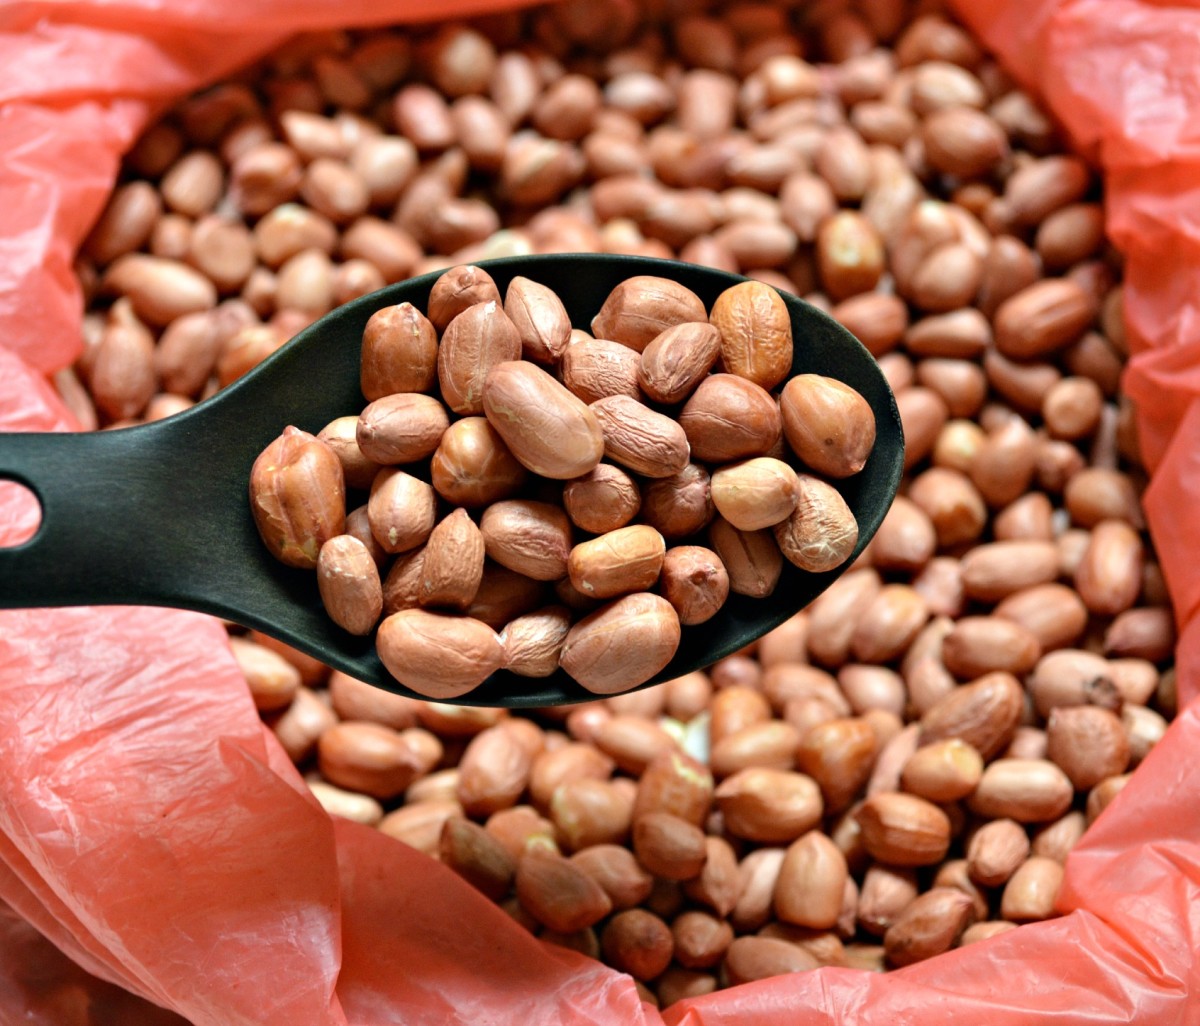 These raw, unroasted peanuts are ready to be made into creamy peanut butter!